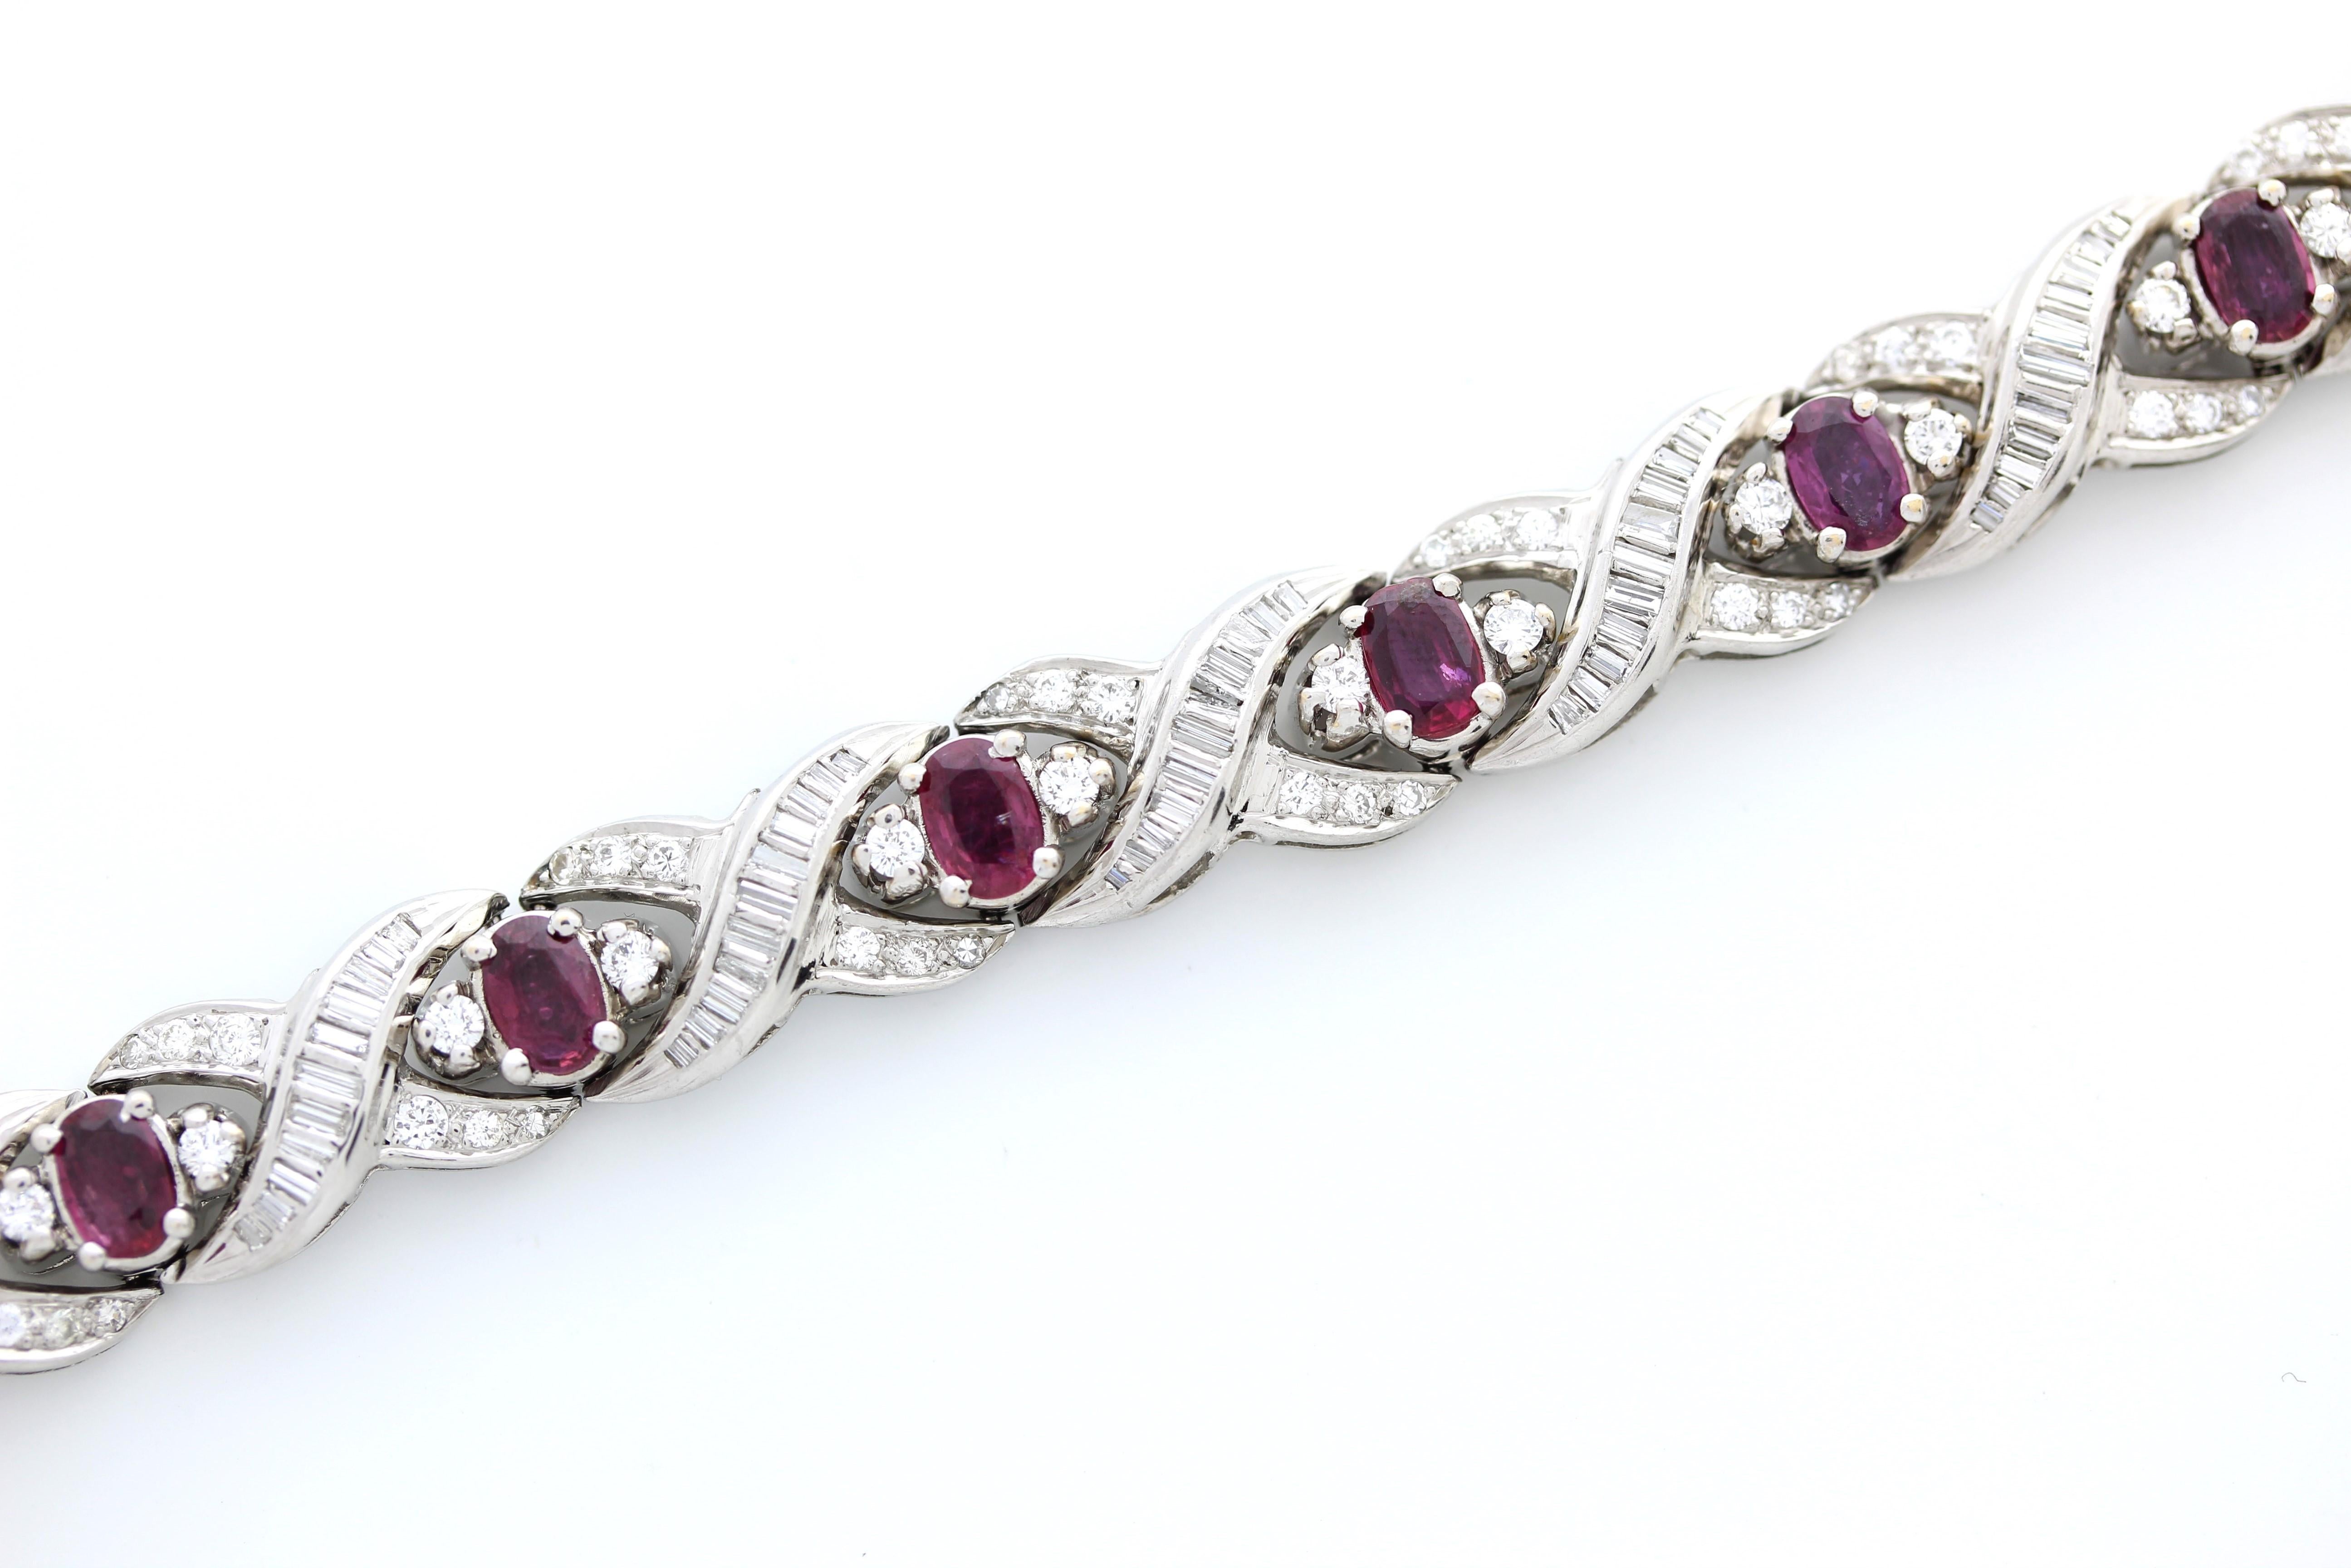 Bracelets with a combination of rubies, platinum, oval diamonds, and round stones. Ruby and diamond jewelry can be quite exquisite, and the choice of metal and stone shapes can greatly influence the overall design. Platinum is a popular choice for